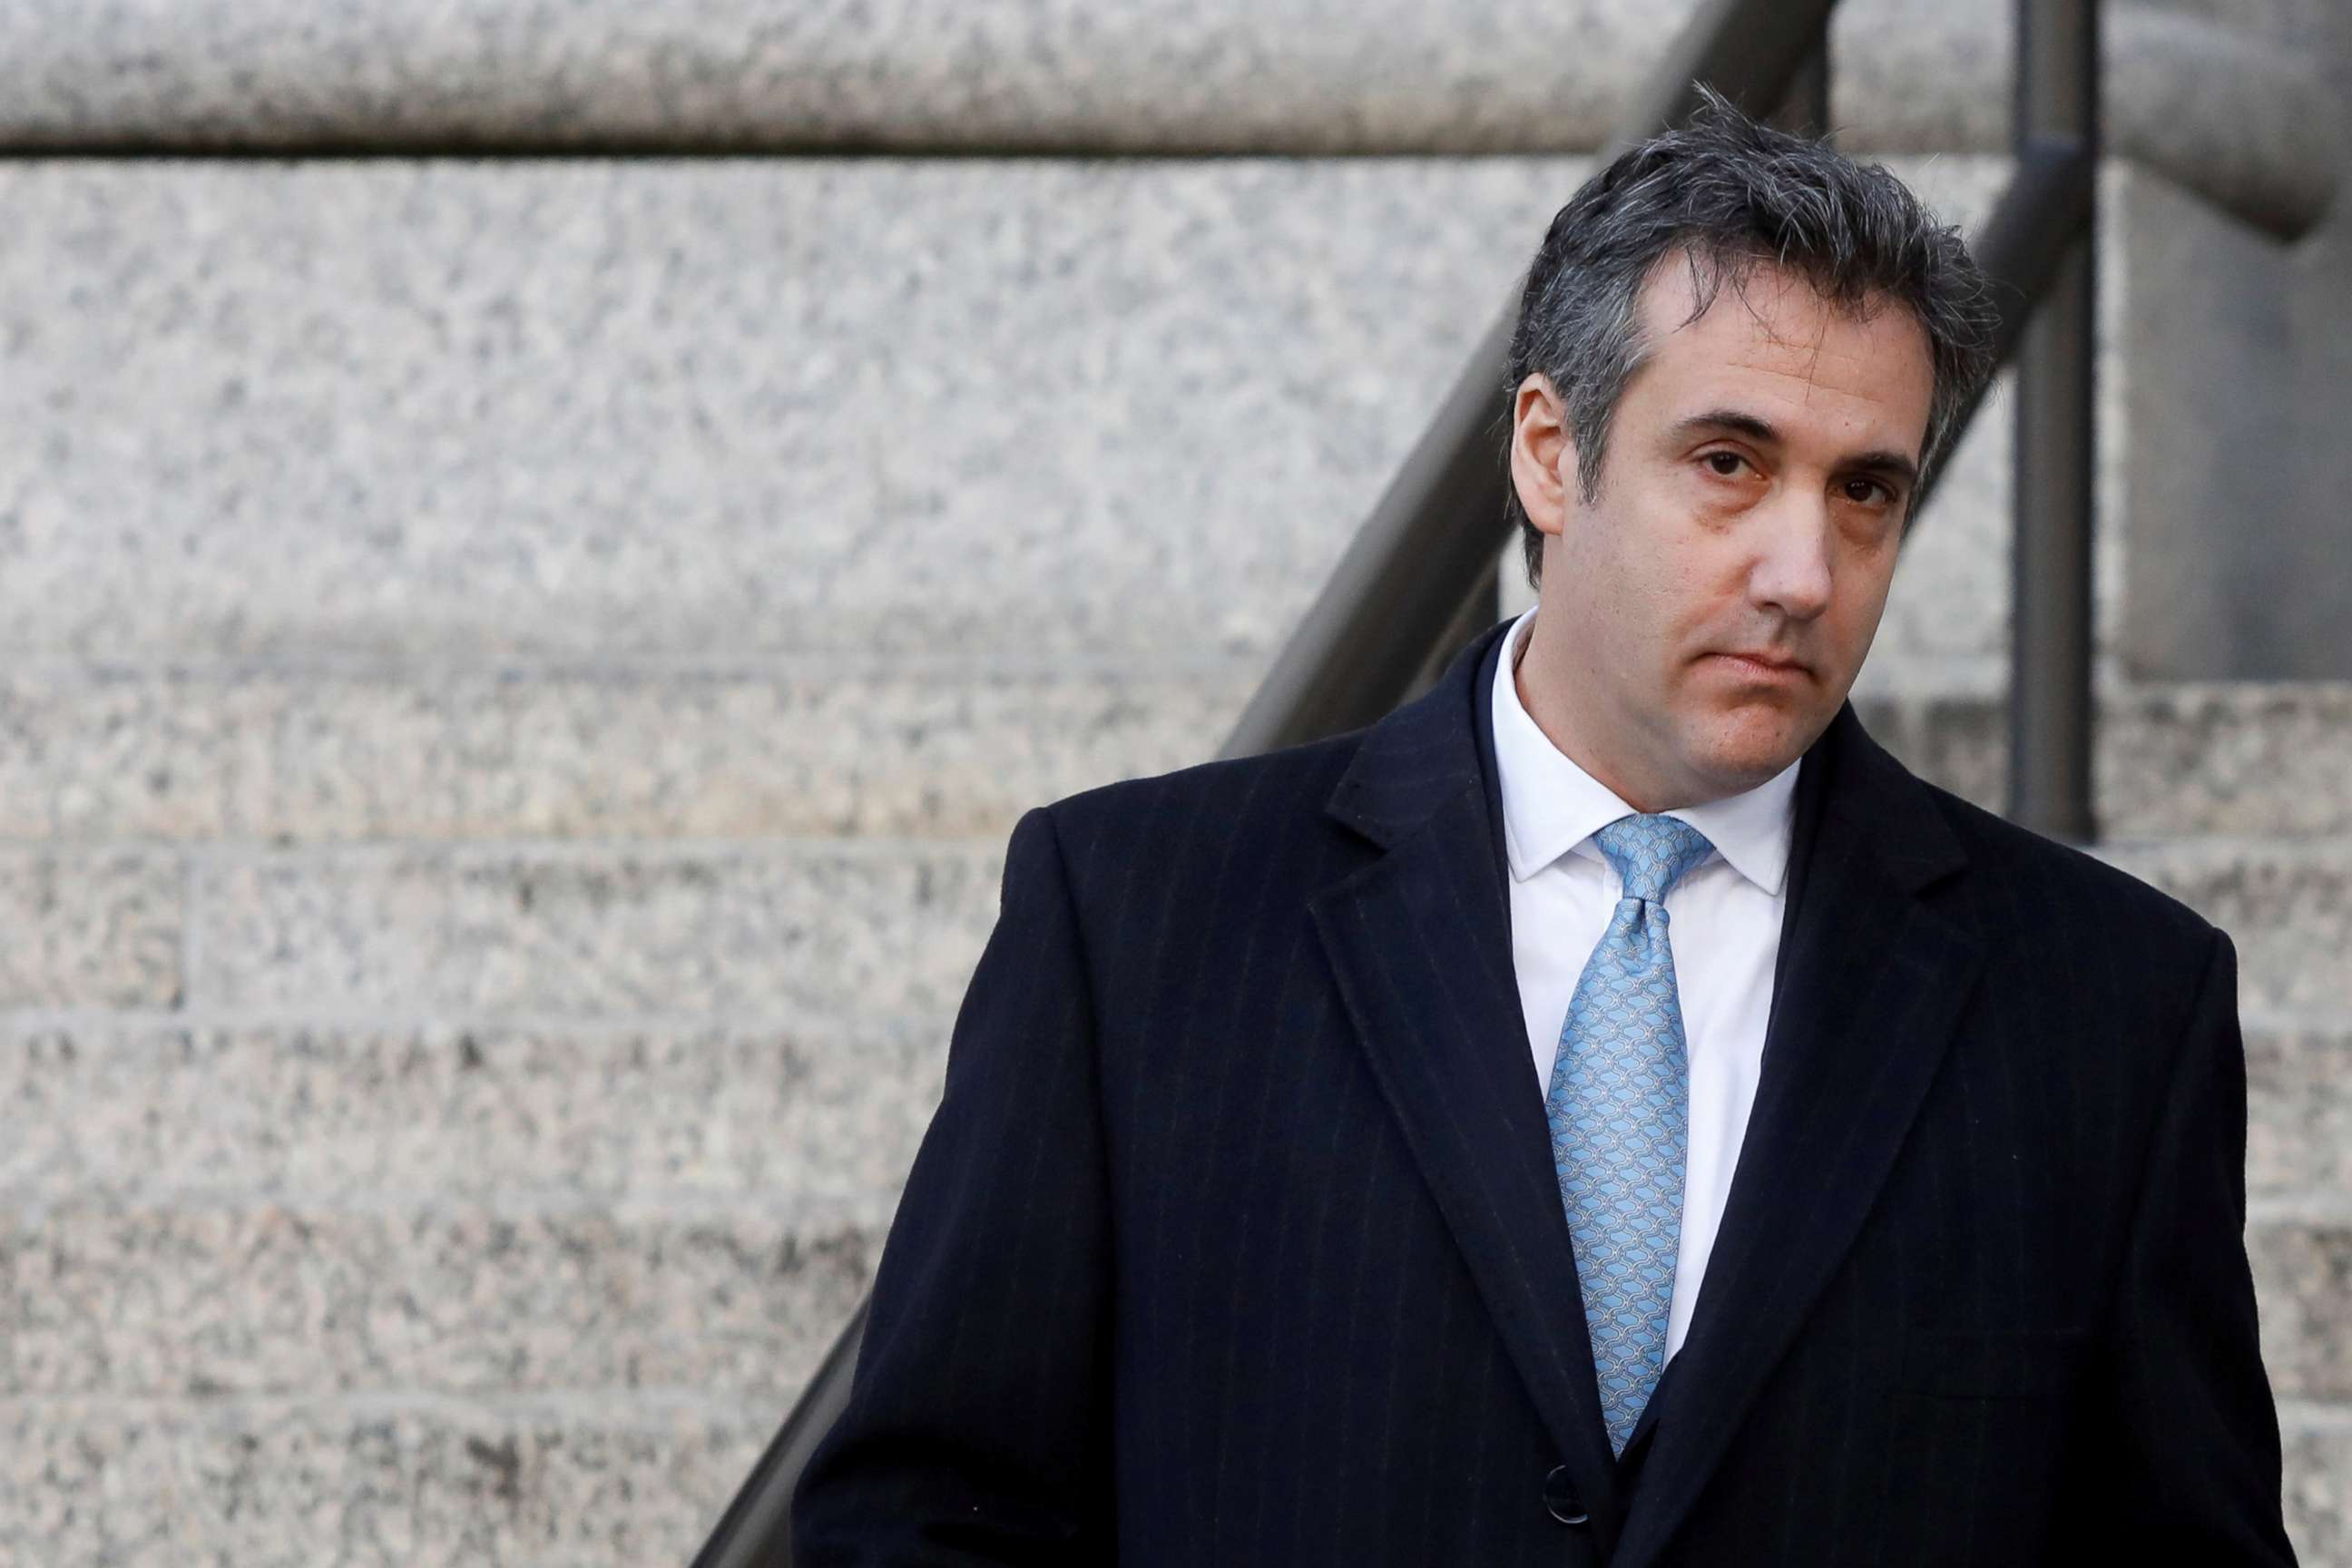 PHOTO: Michael Cohen exits Federal Court after entering a guilty plea in New York City, Nov. 29, 2018.